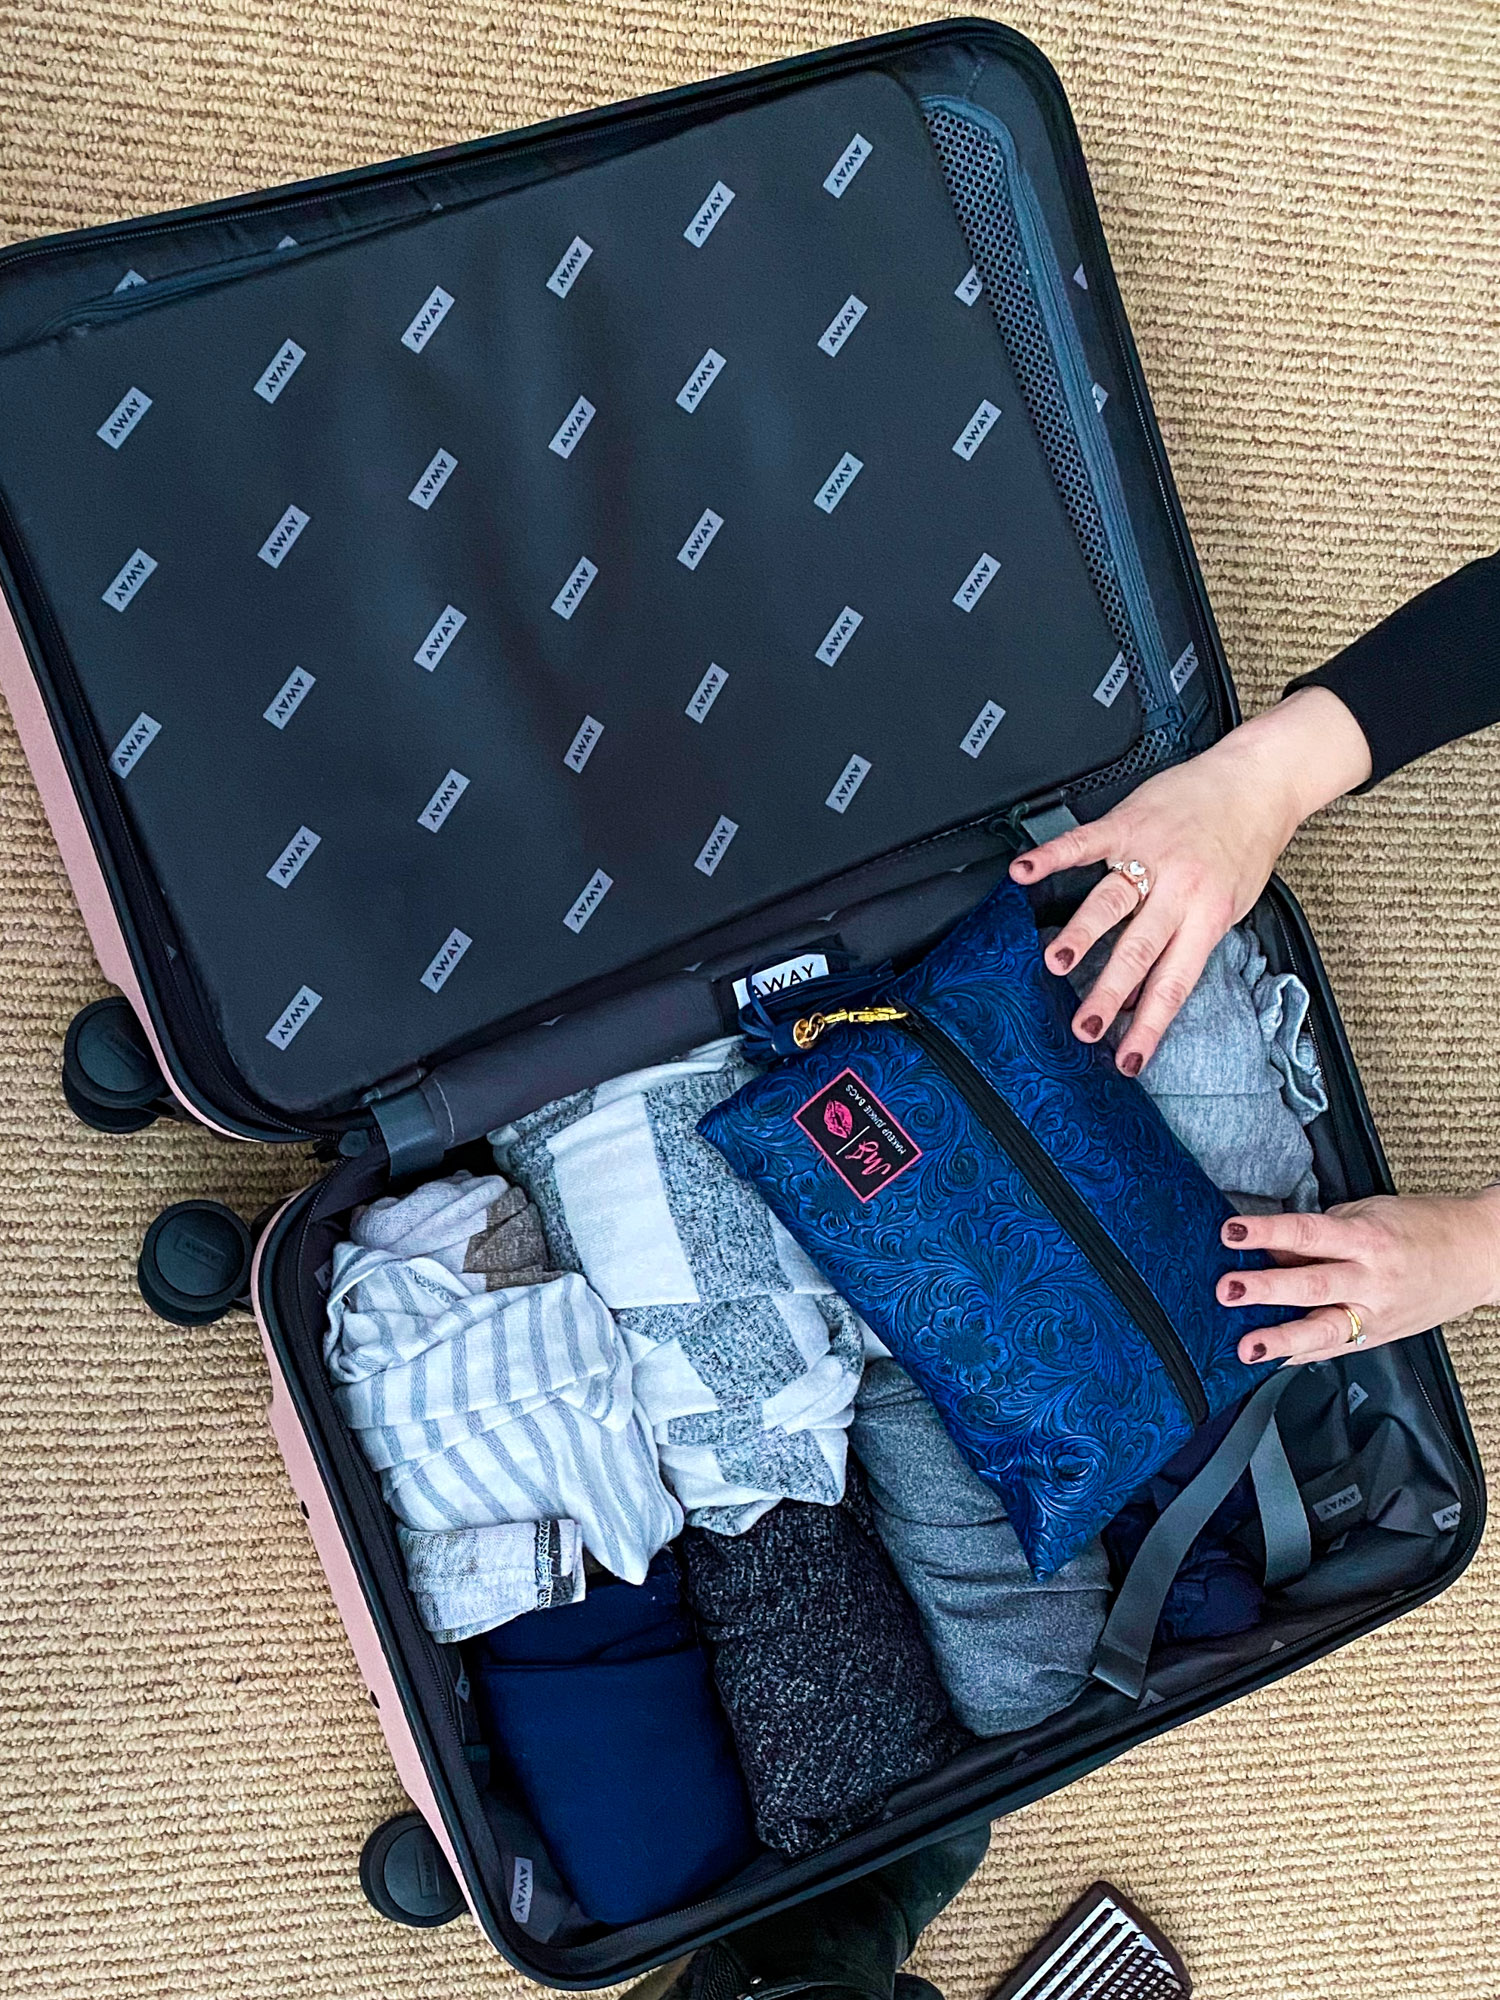 What to Consider Before Buying Soft or Hard Shell Luggage